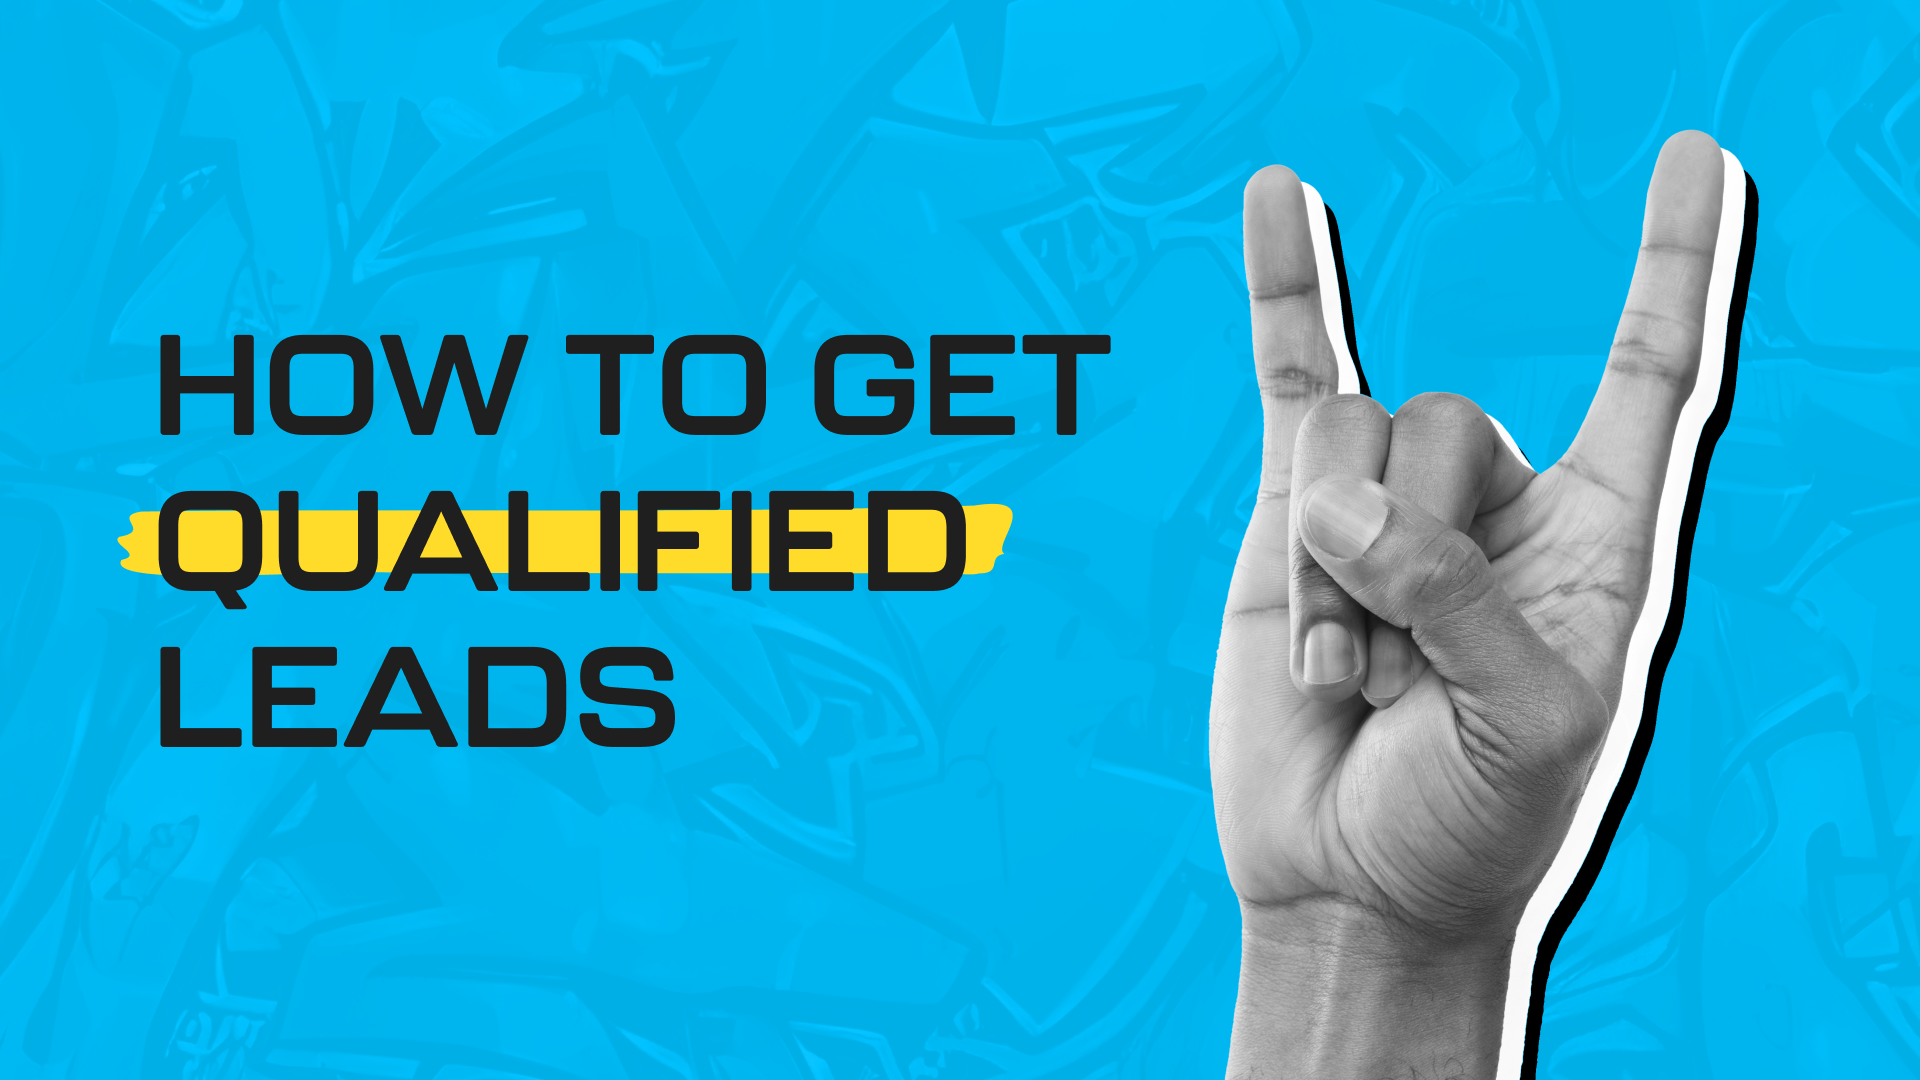 How to Get Qualified Leads